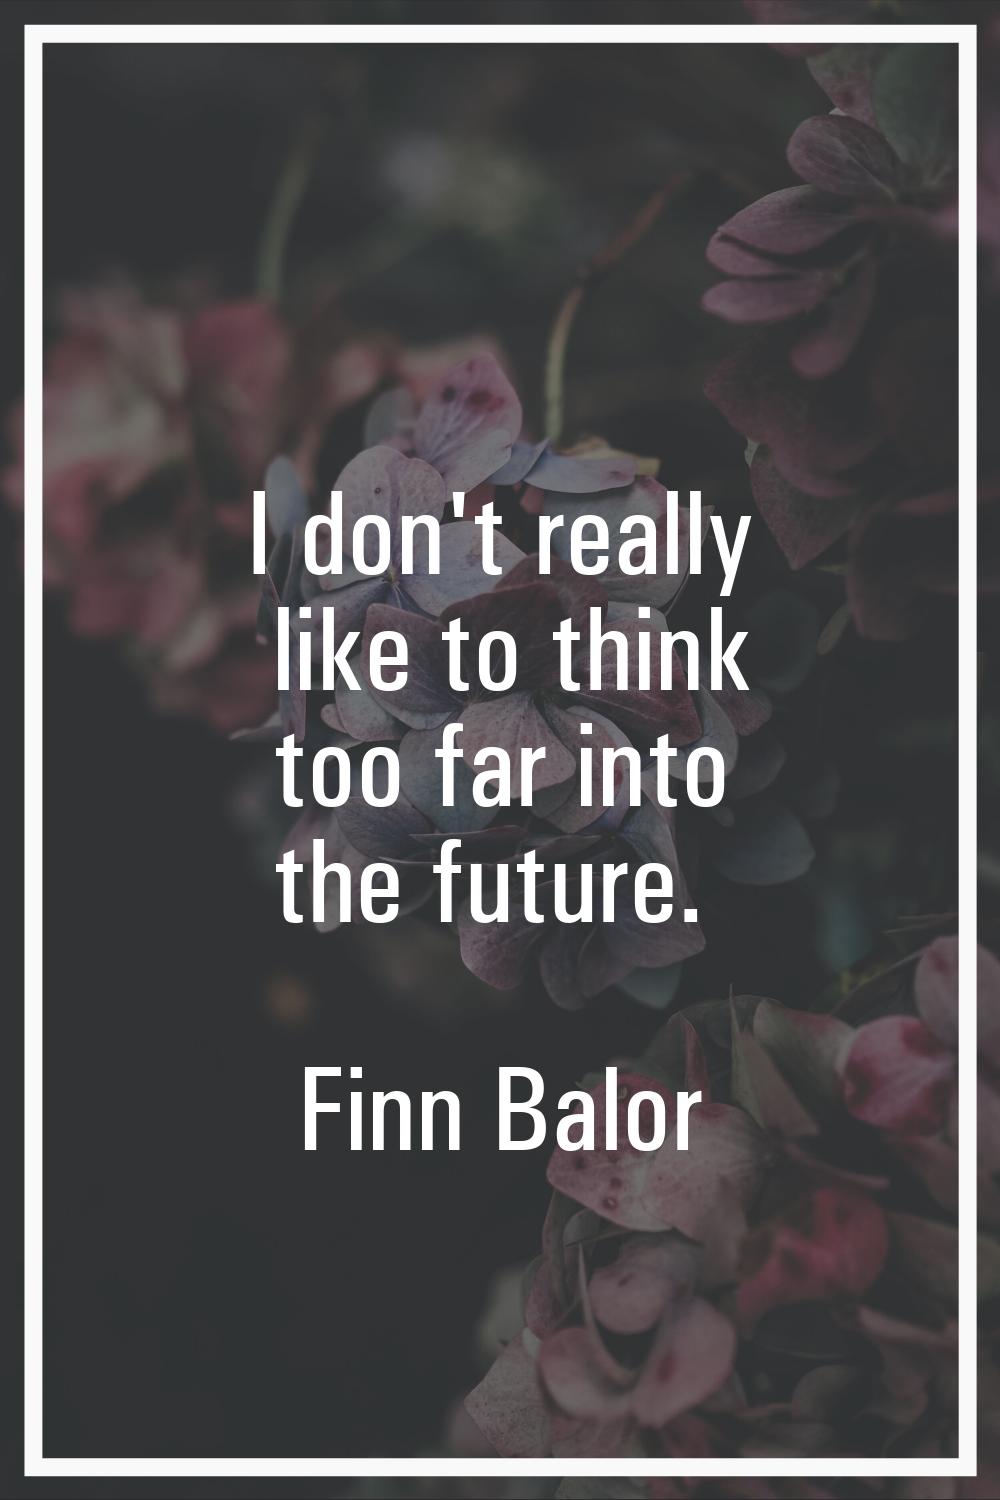 I don't really like to think too far into the future.